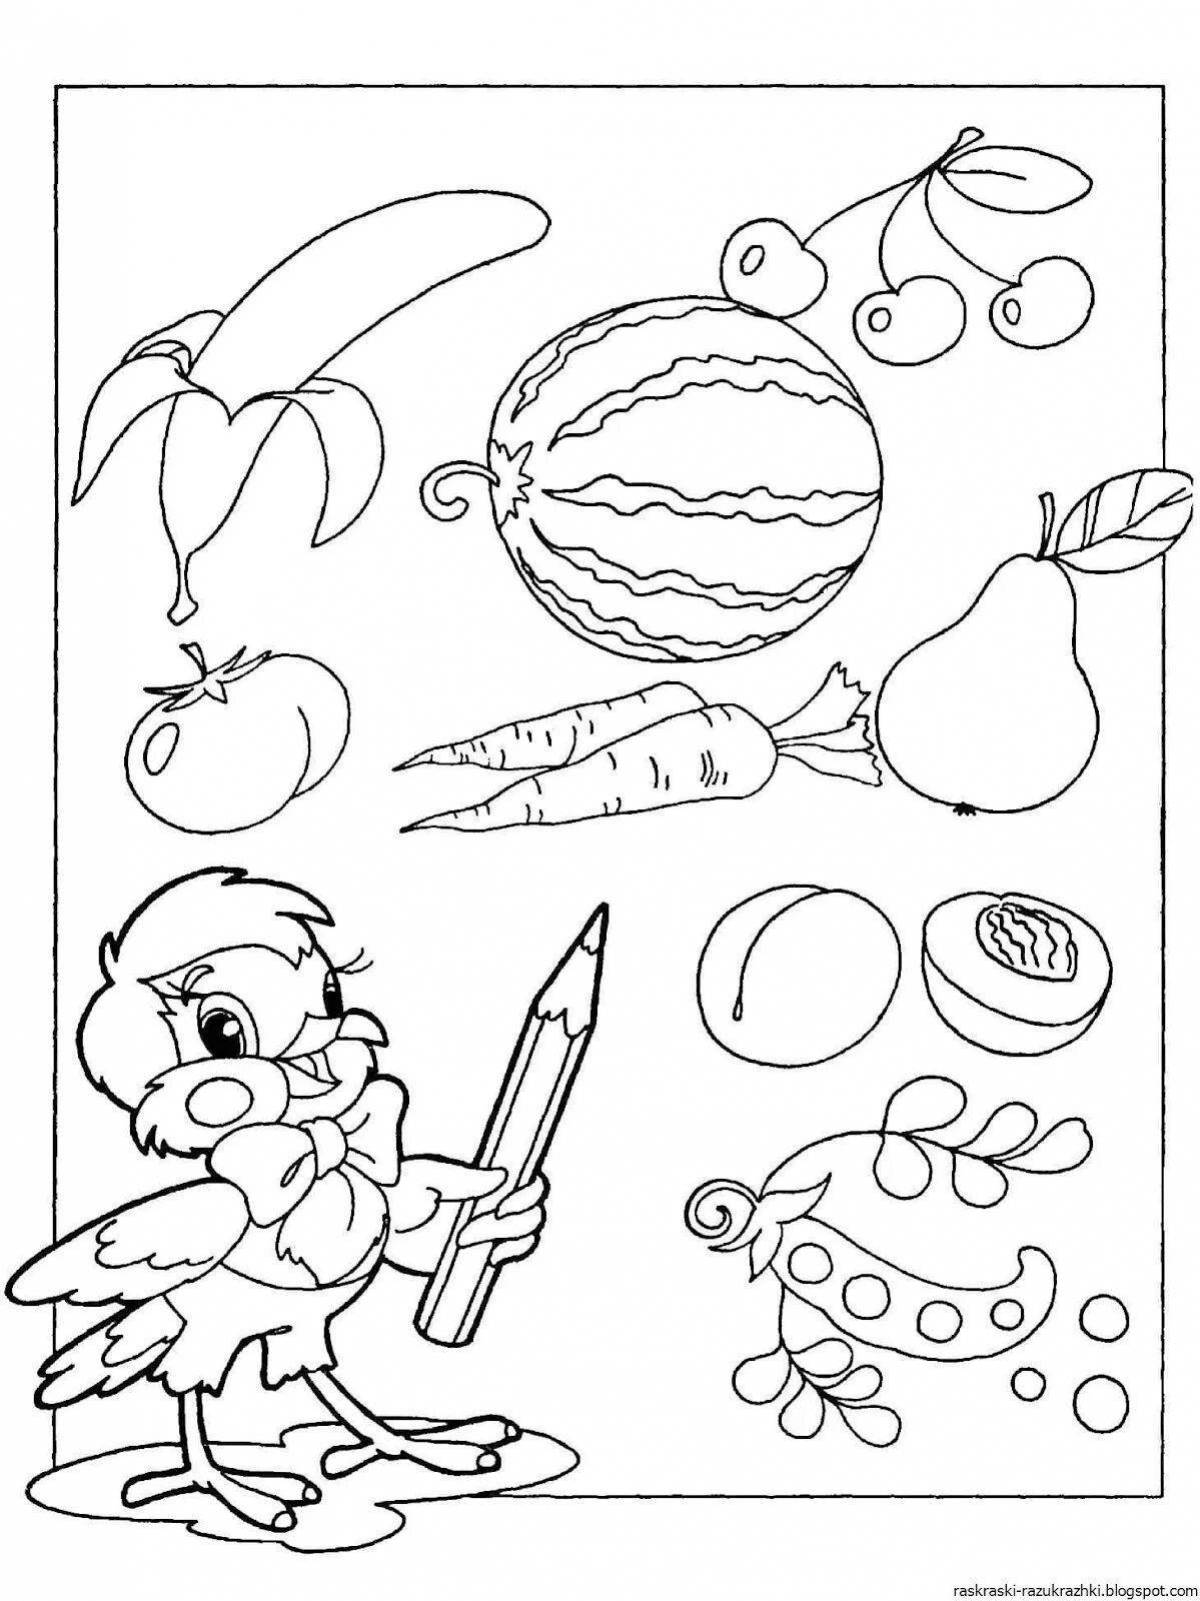 Invitation coloring page 6 years of development